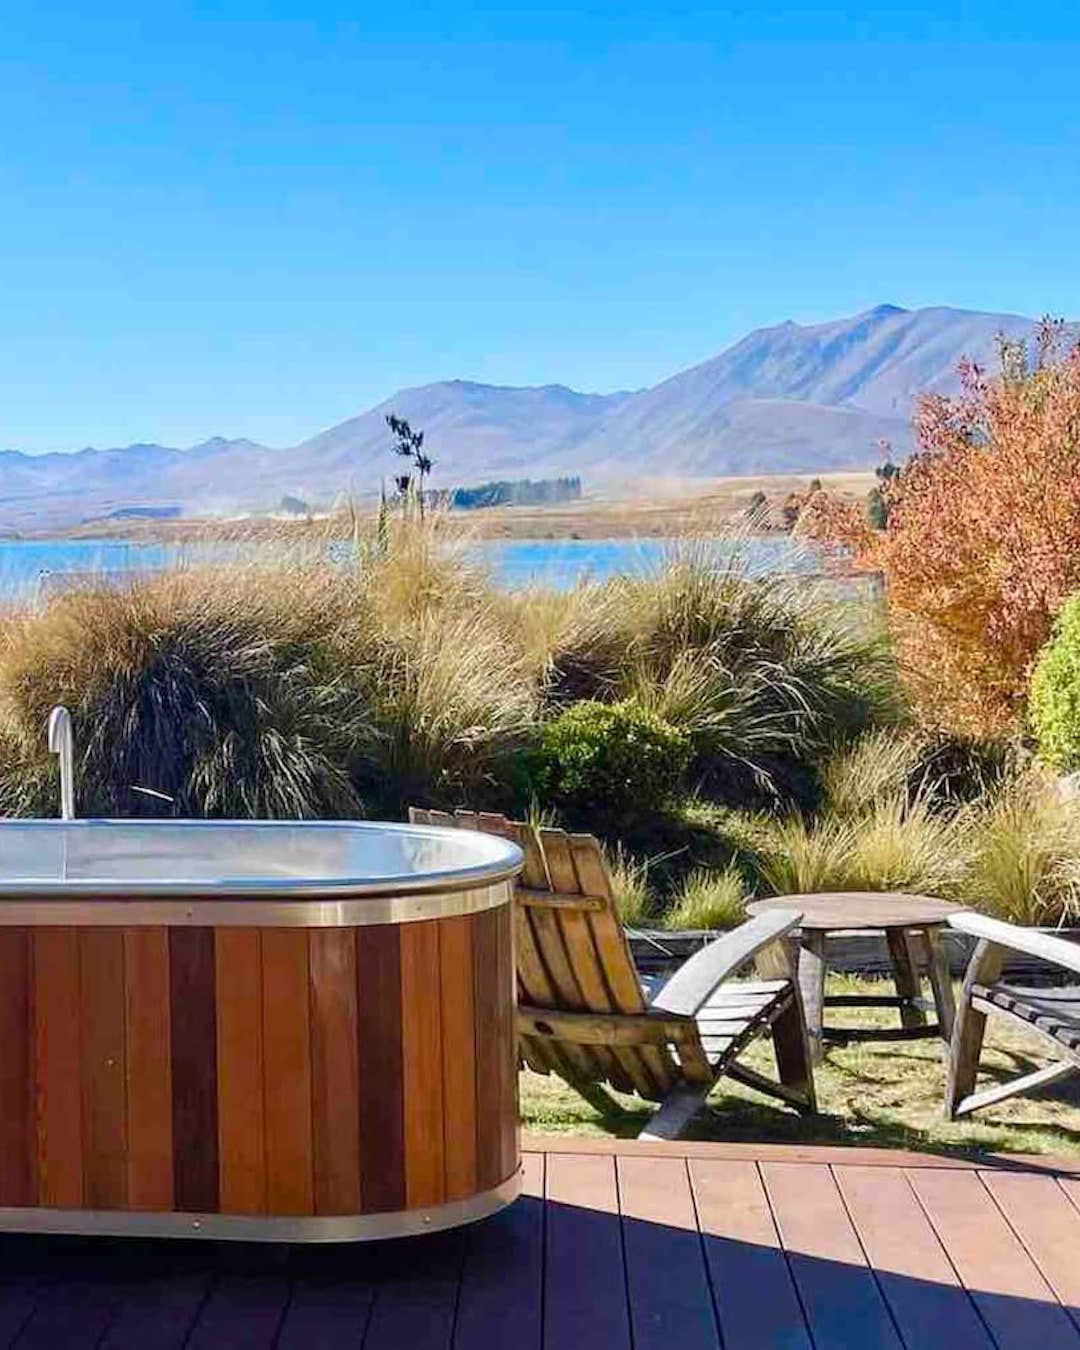 A hot tub and garden setting with views of mountains and a lake